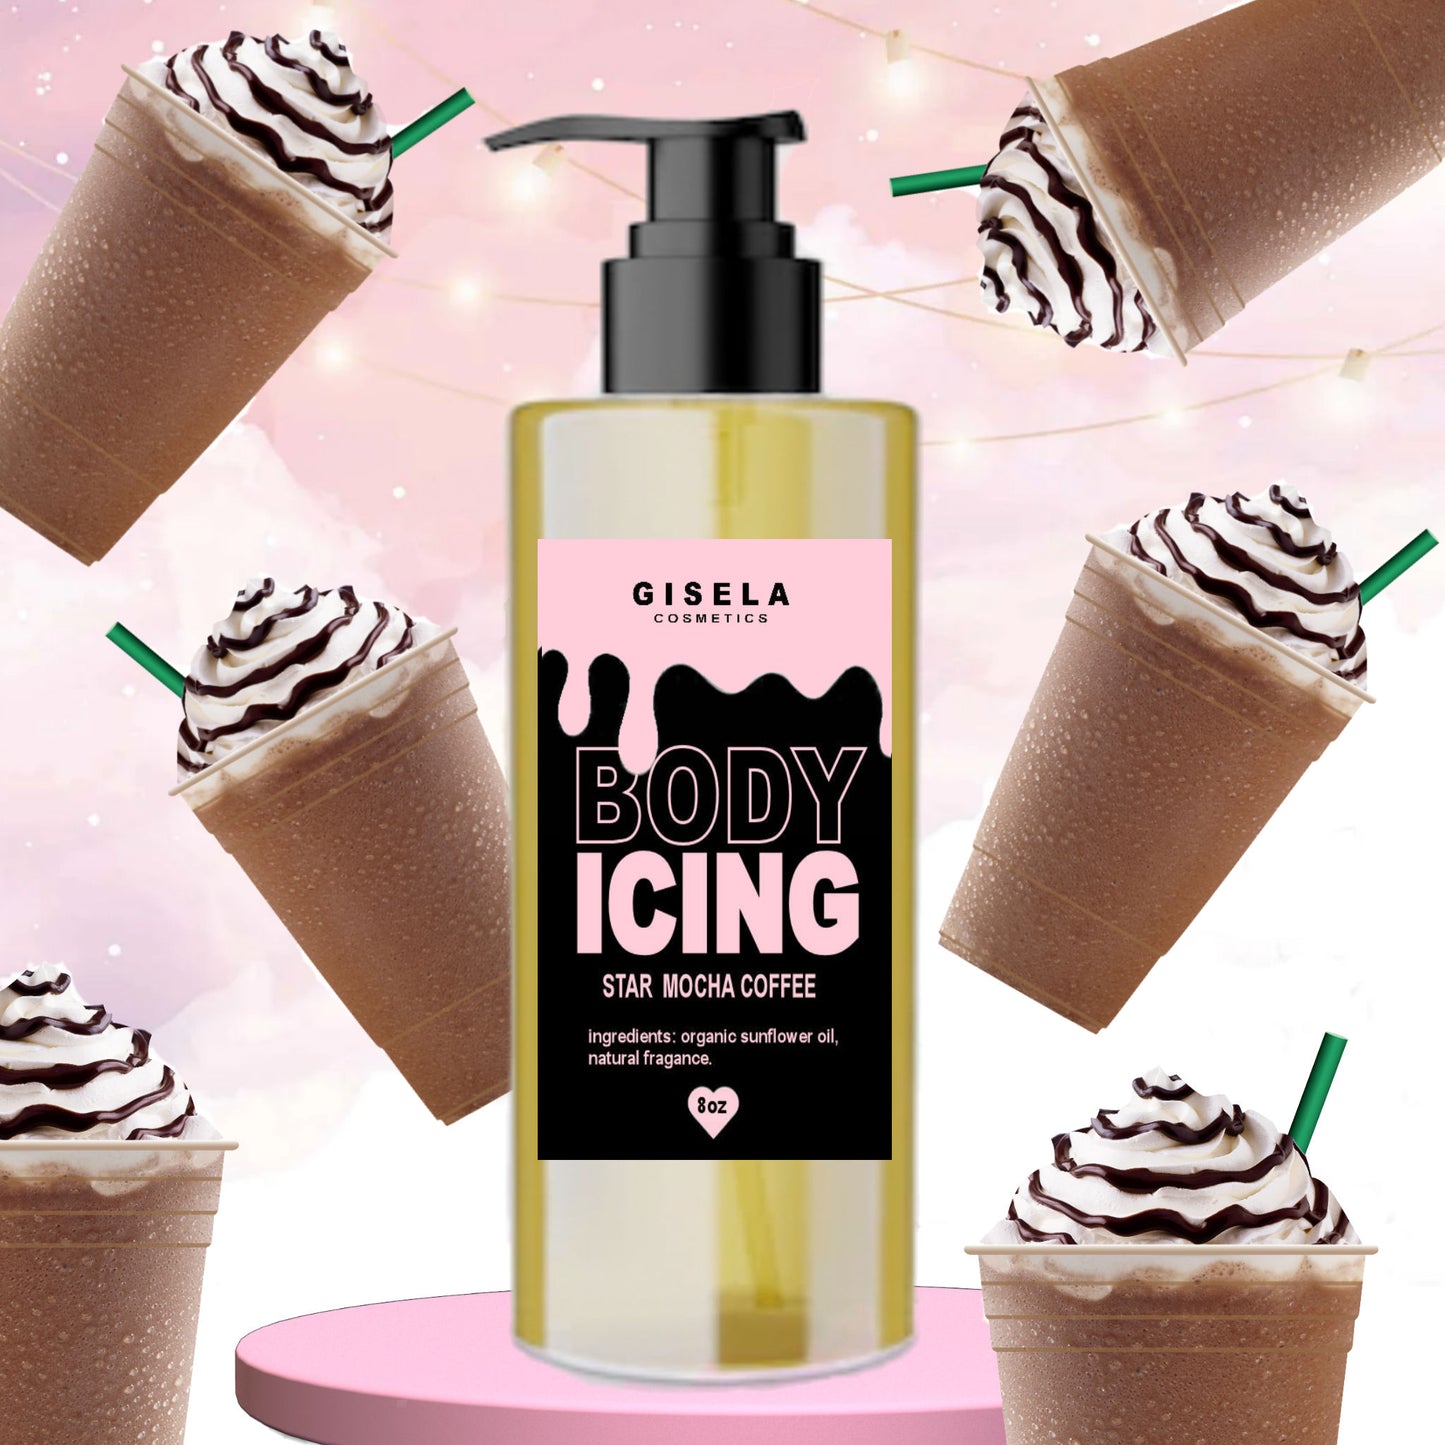 (HURRY! 🏃🏽‍♀️ONLY 9 IN STOCK🔥) Star Mocha Coffee ┃ Body Icing